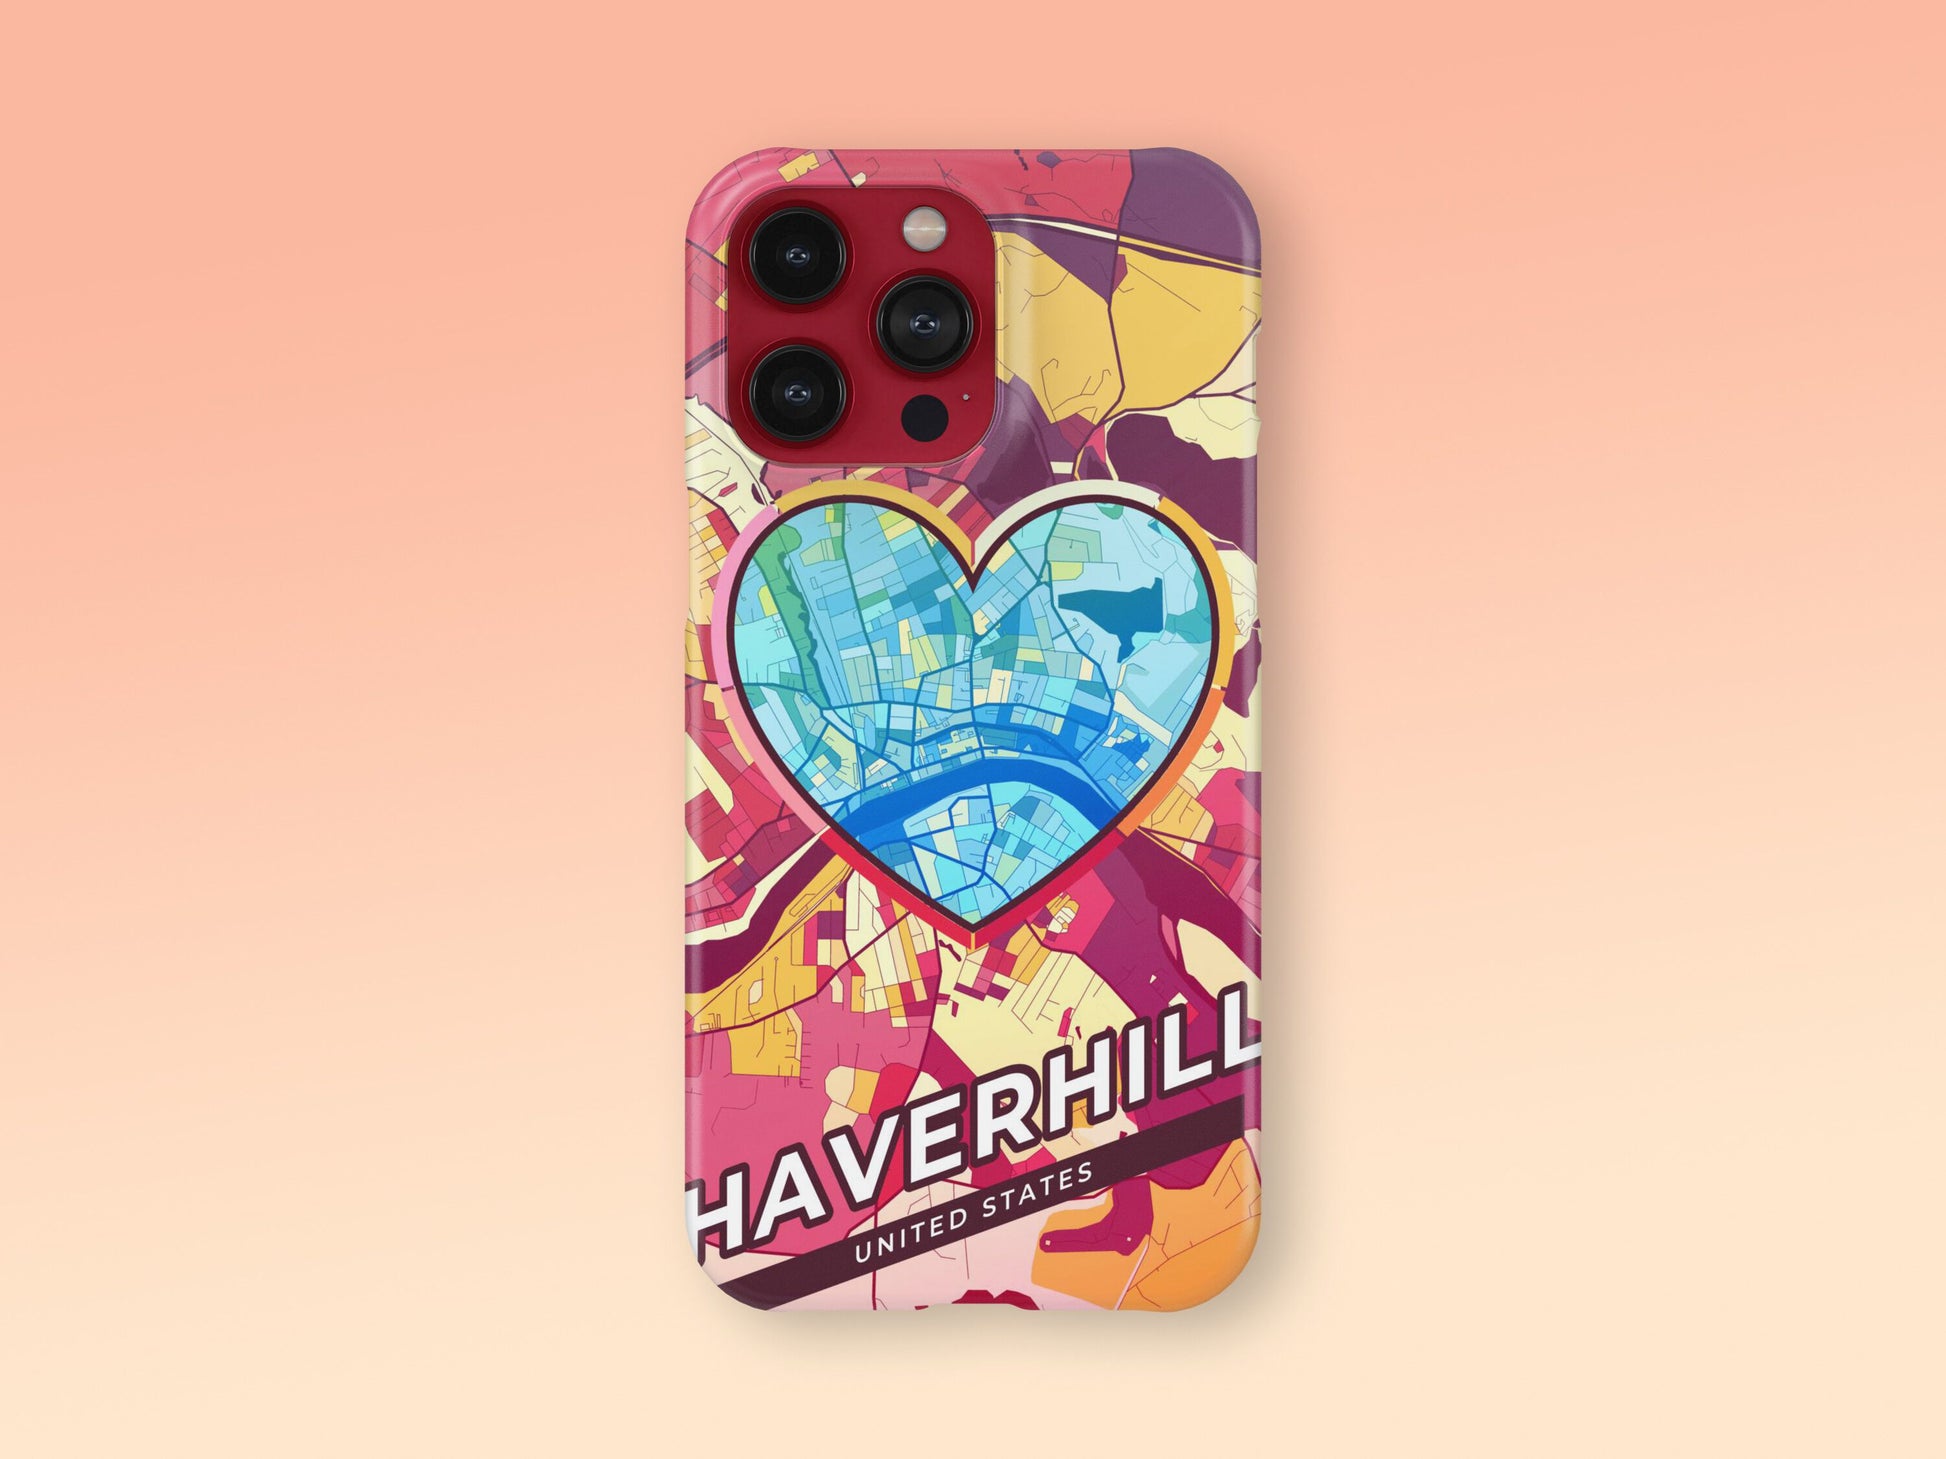 Haverhill Massachusetts slim phone case with colorful icon. Birthday, wedding or housewarming gift. Couple match cases. 2